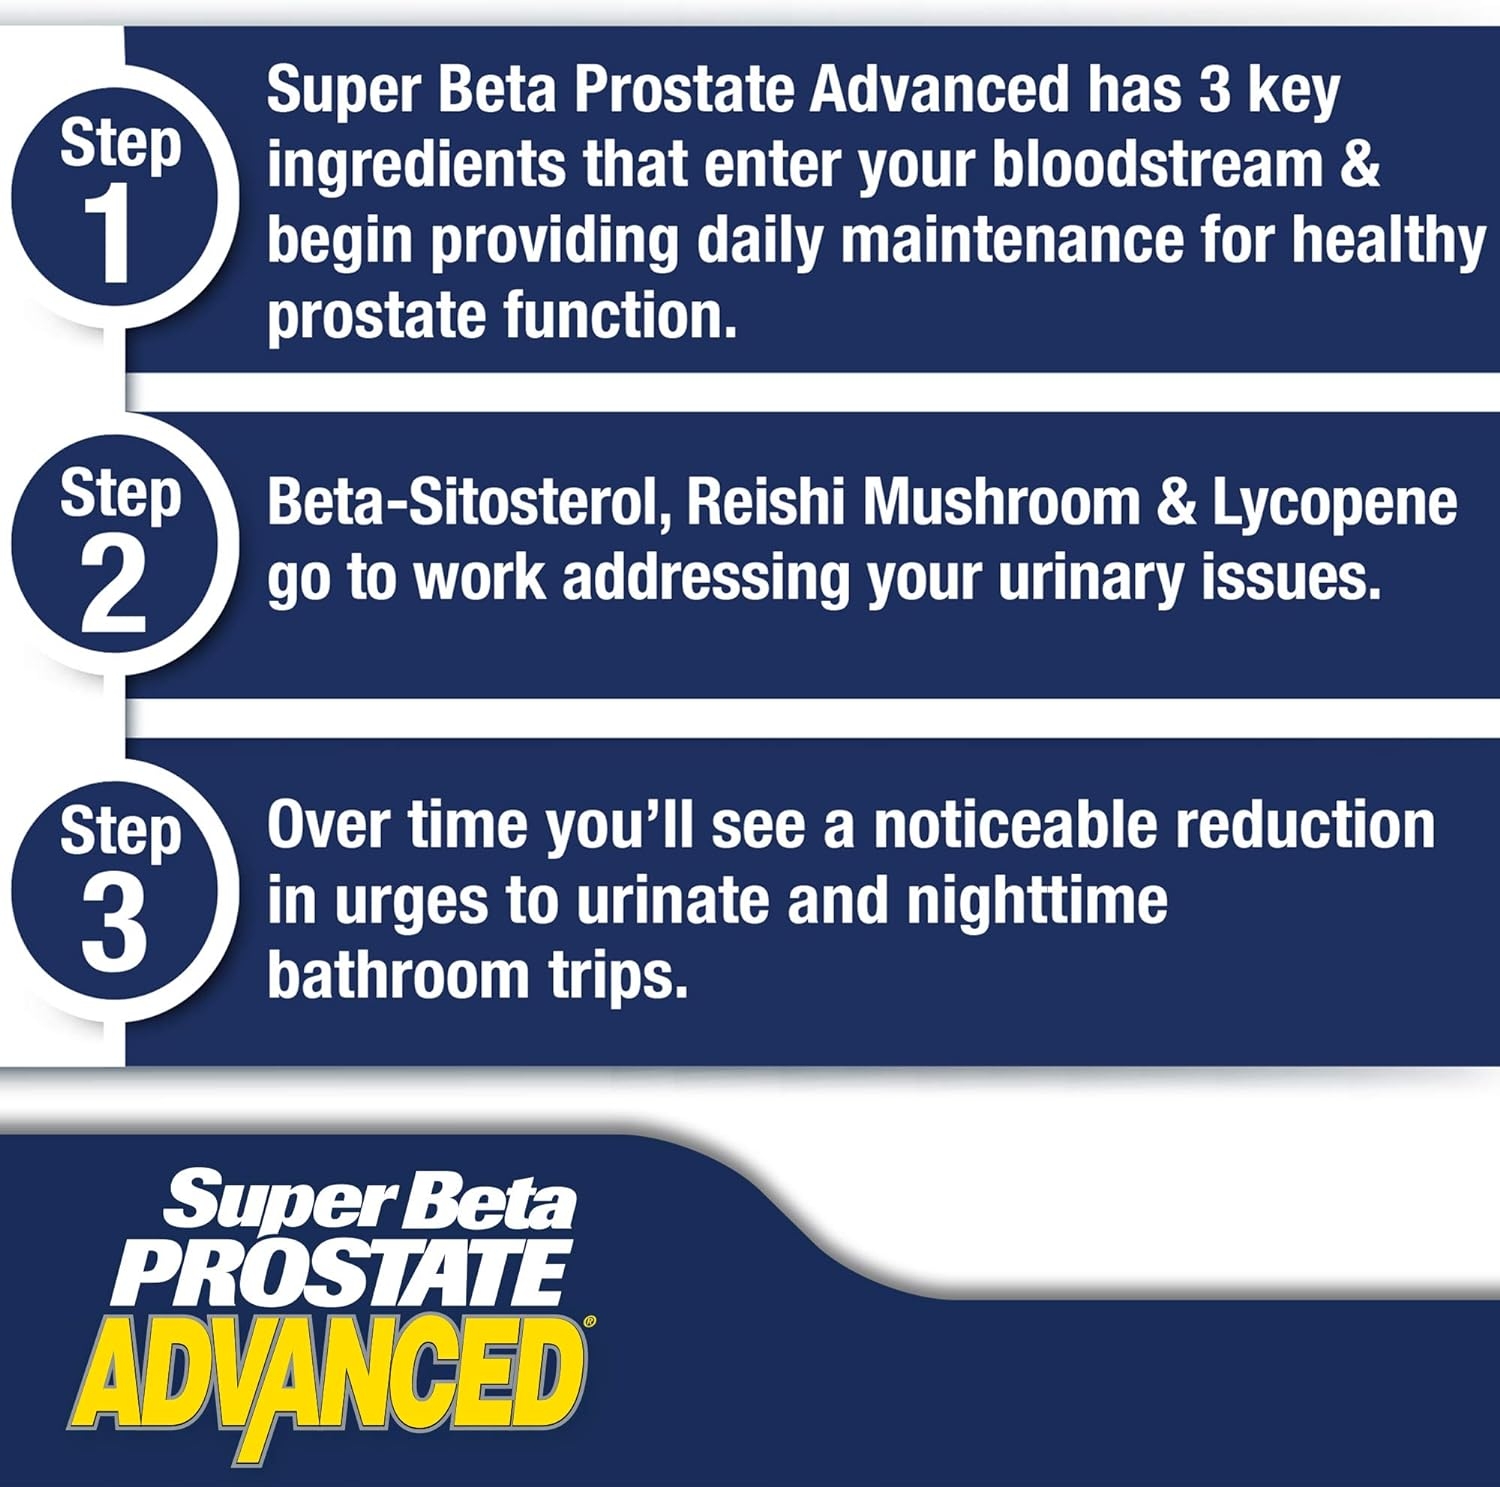 Super Beta Prostate Advanced Chewables - Delicious, Urologist Recommended Prostate Supplement for Men – Reduce Bathroom Trips, Promote Sleep, Support Prostate Health (180 Chews, 3-Pack)